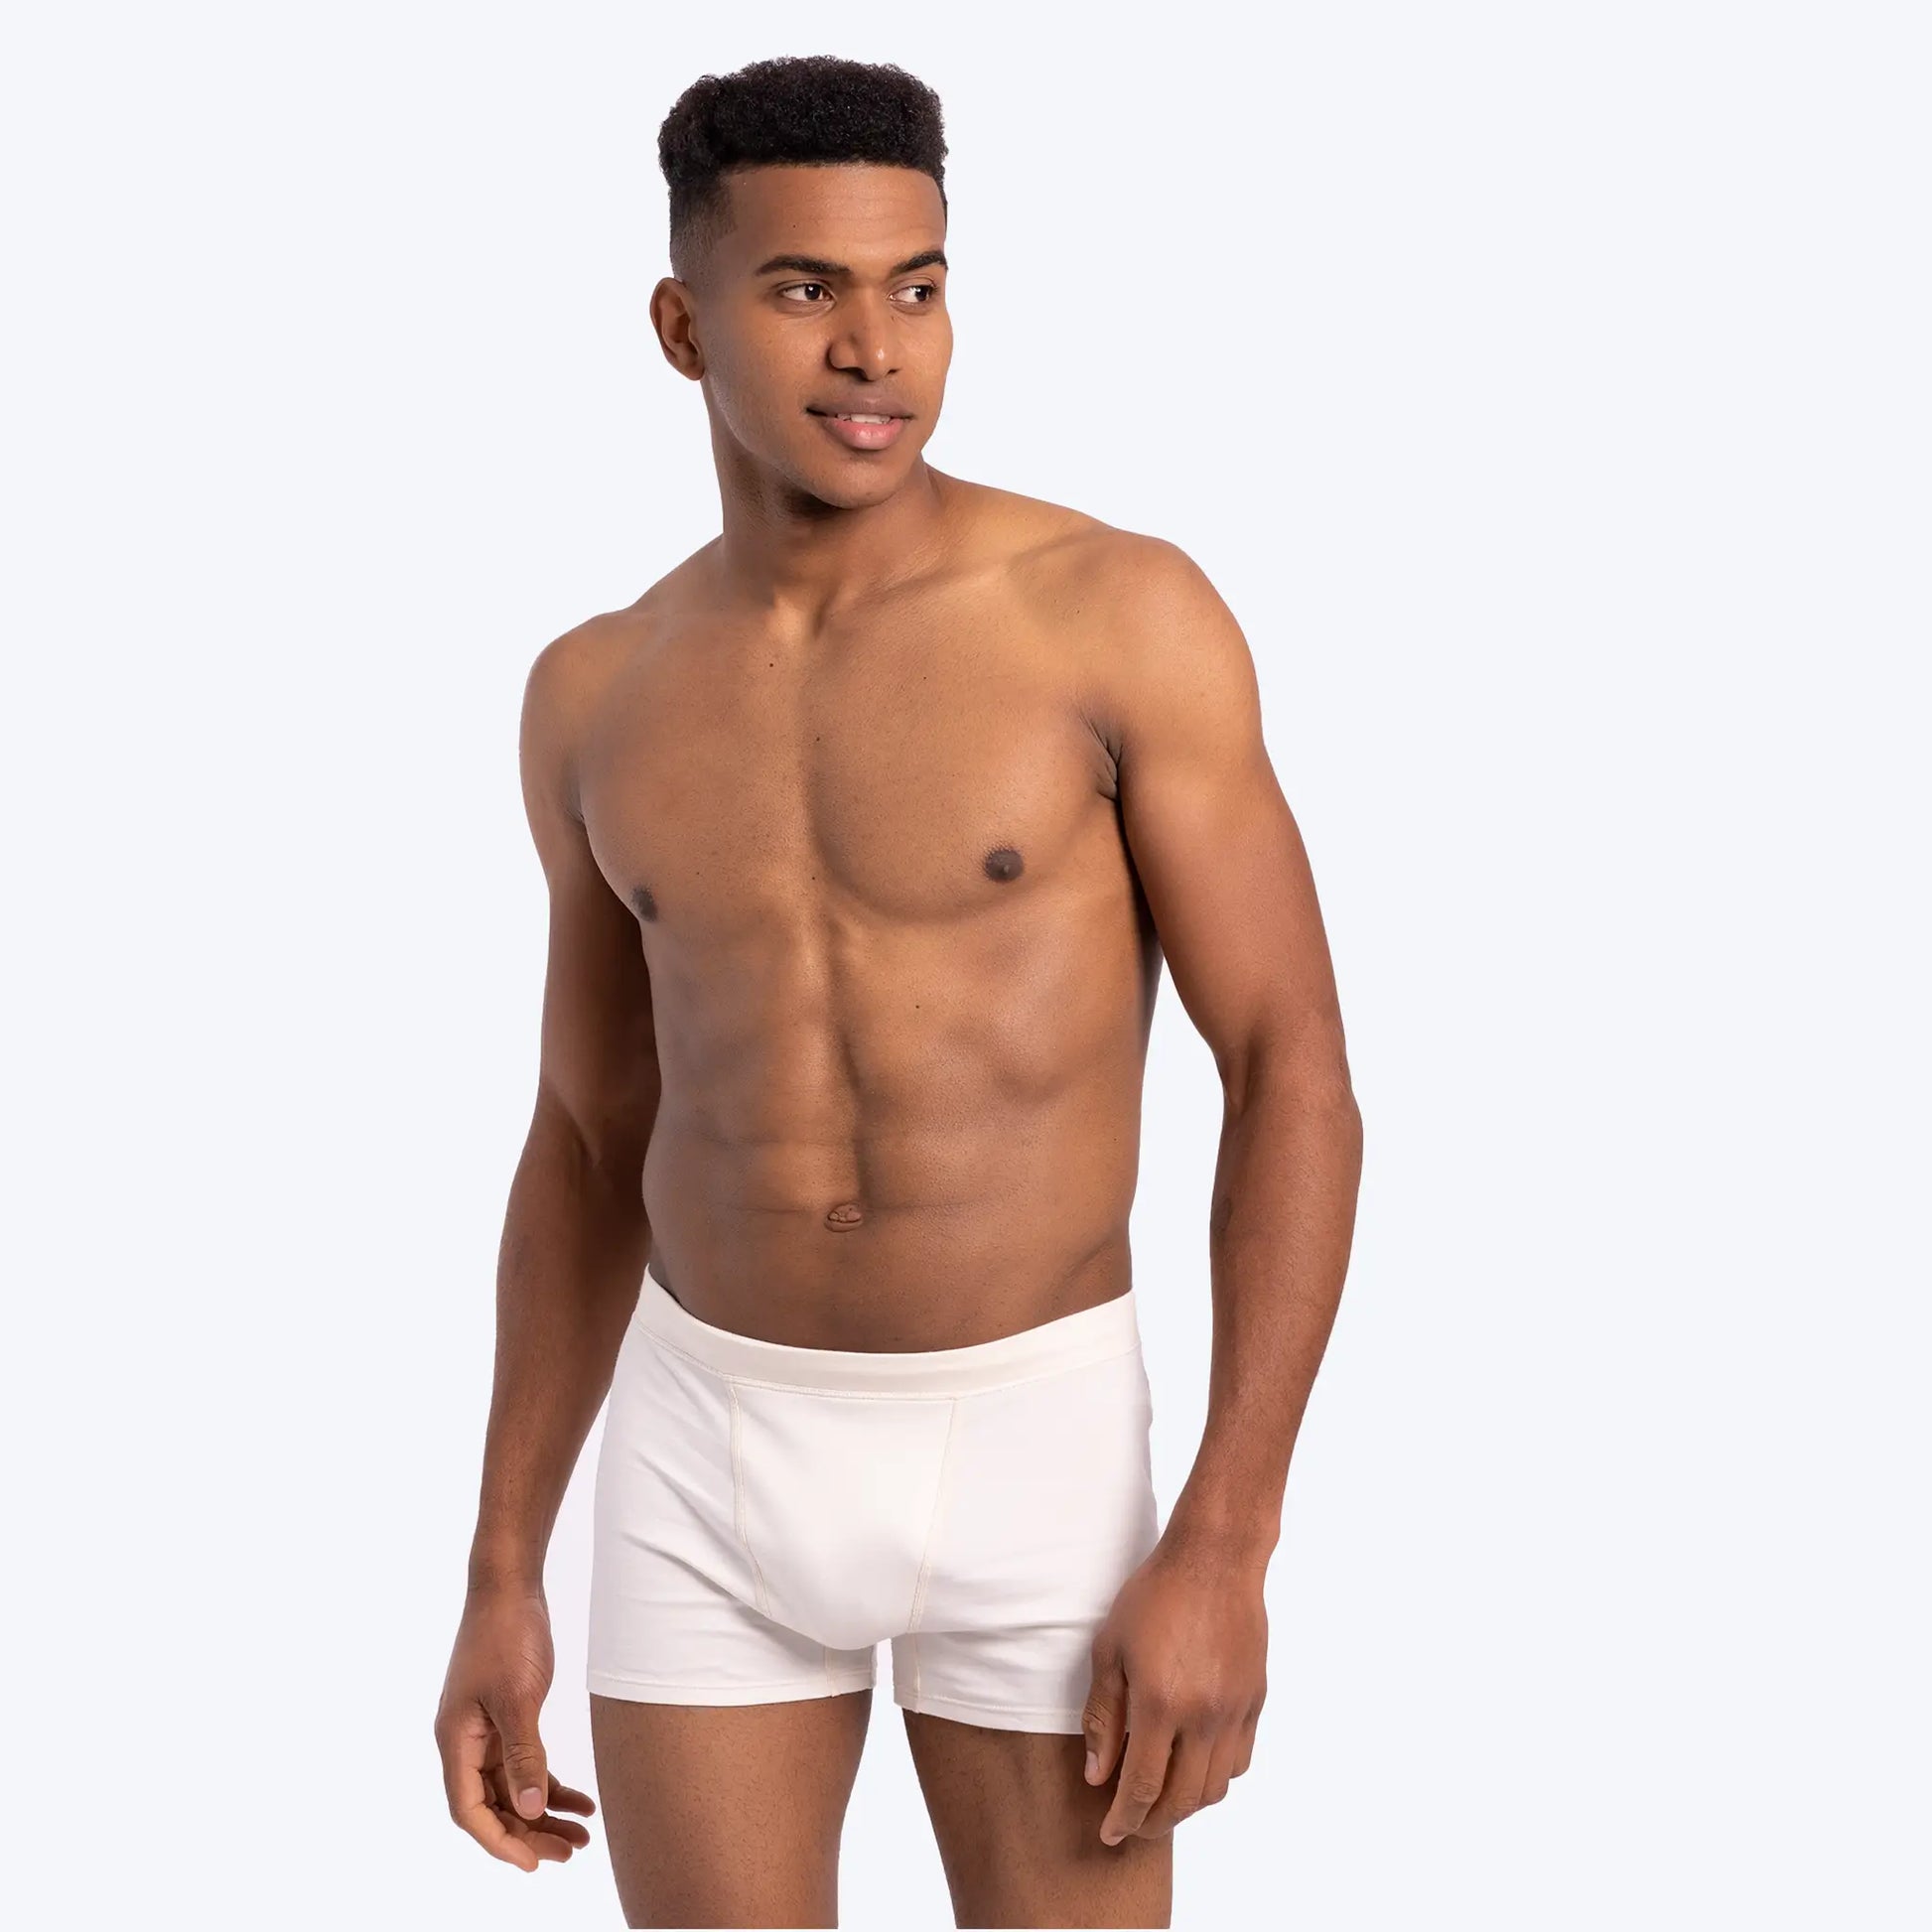 Body4real Organic Clothing 100% Cotton Men's Boxers - Body4Real